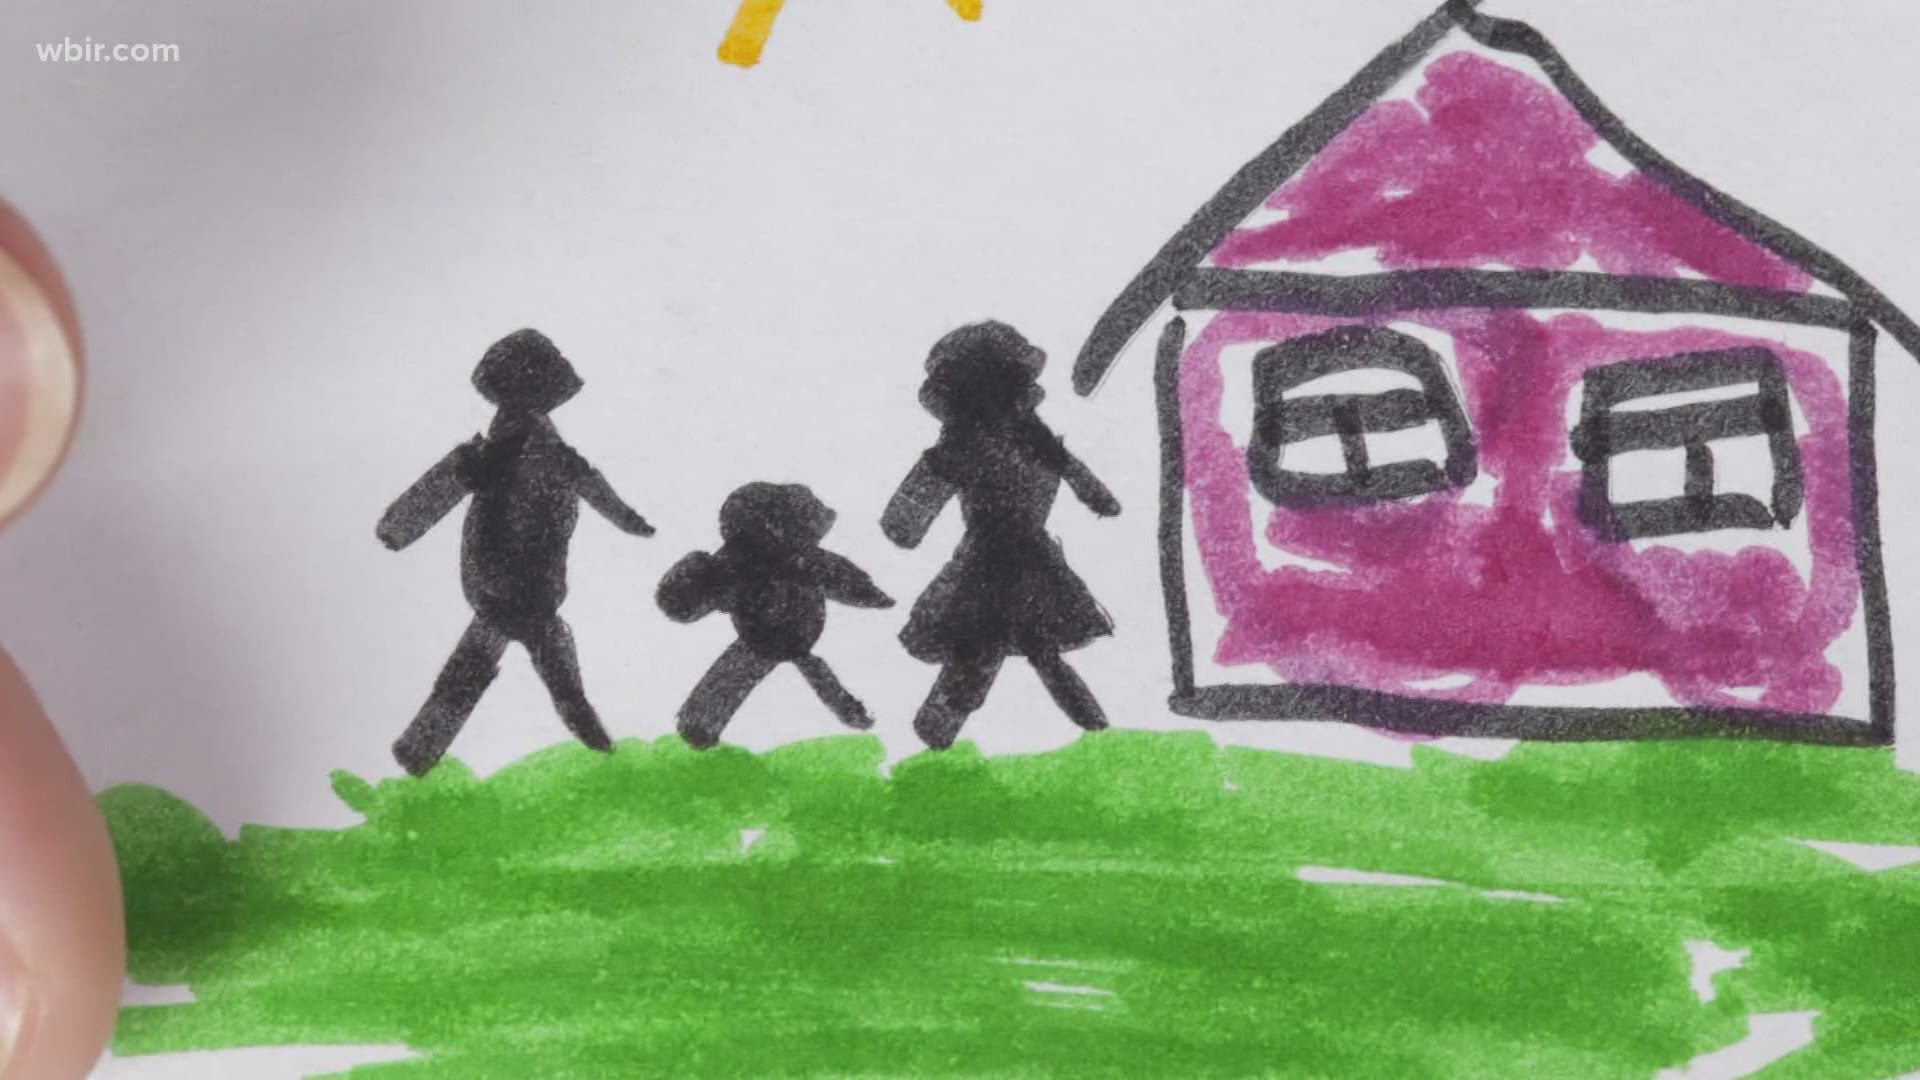 Professionals who handle adoptions in Tennessee explain what steps are in place to ensure kids go to the right homes.